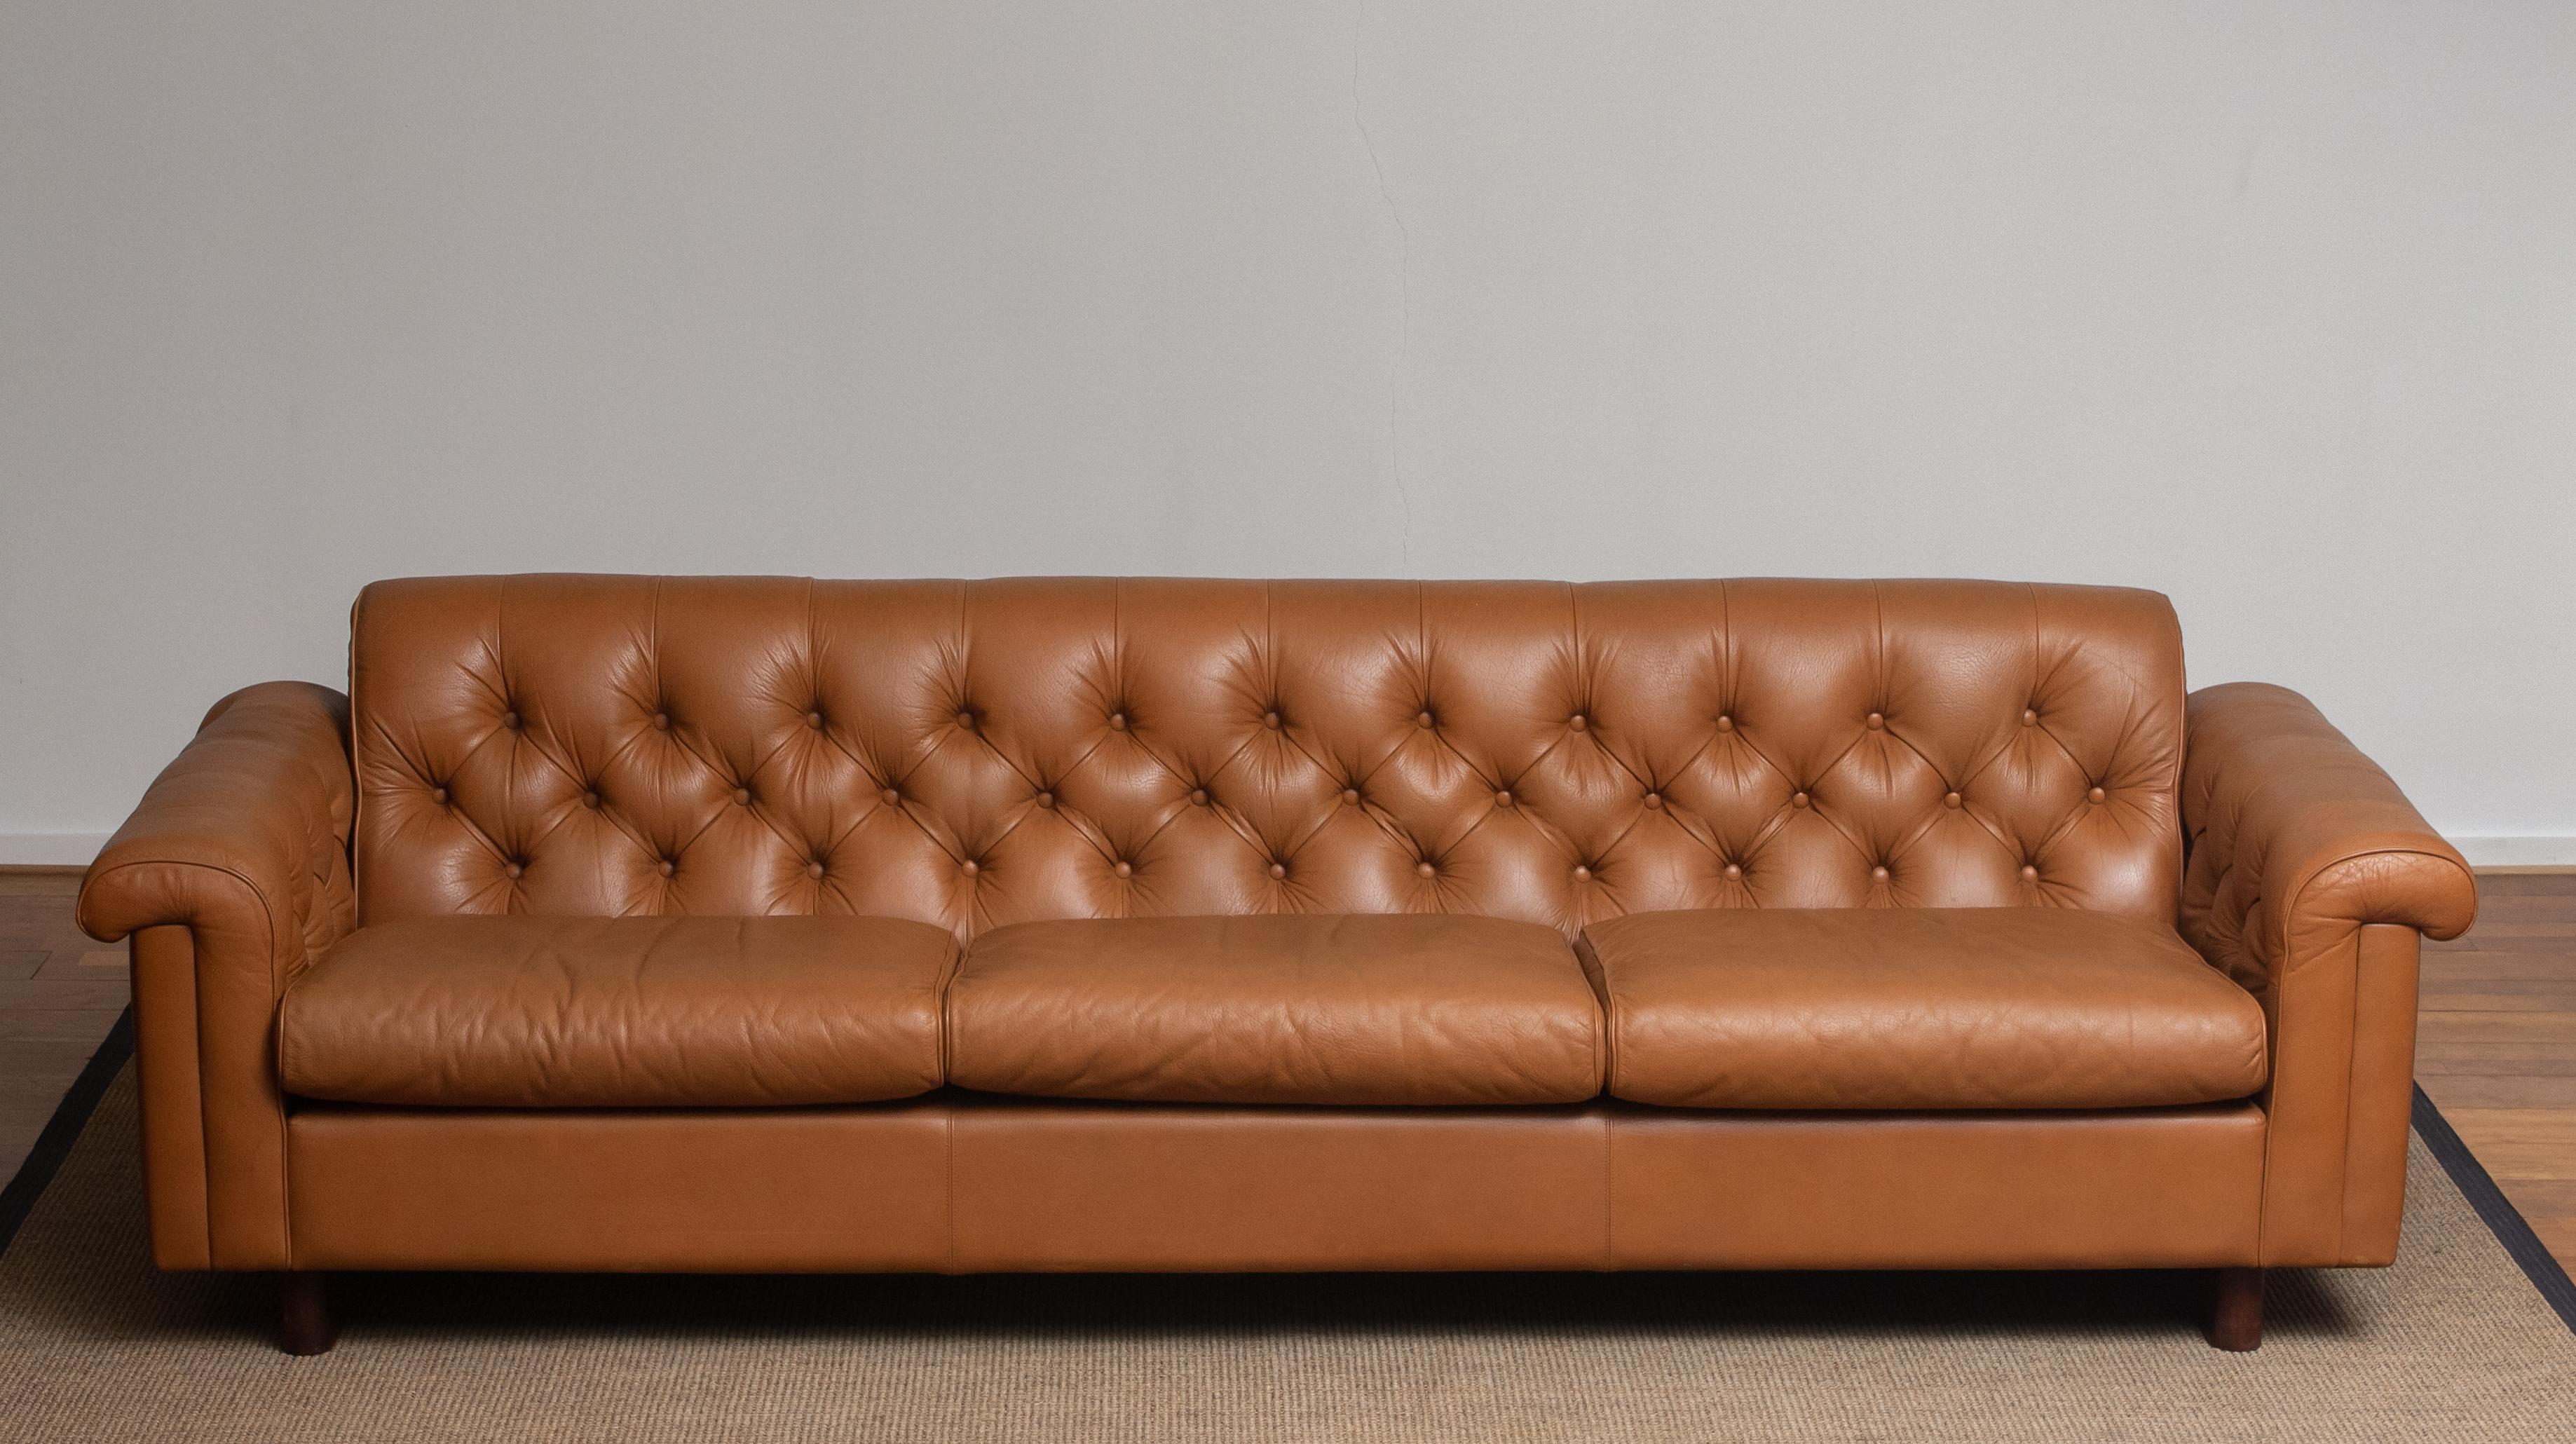 Late 20th Century 1970's Sofa by Karl Erik Ekselius for JOC Design in Camel Color Tufted Leather